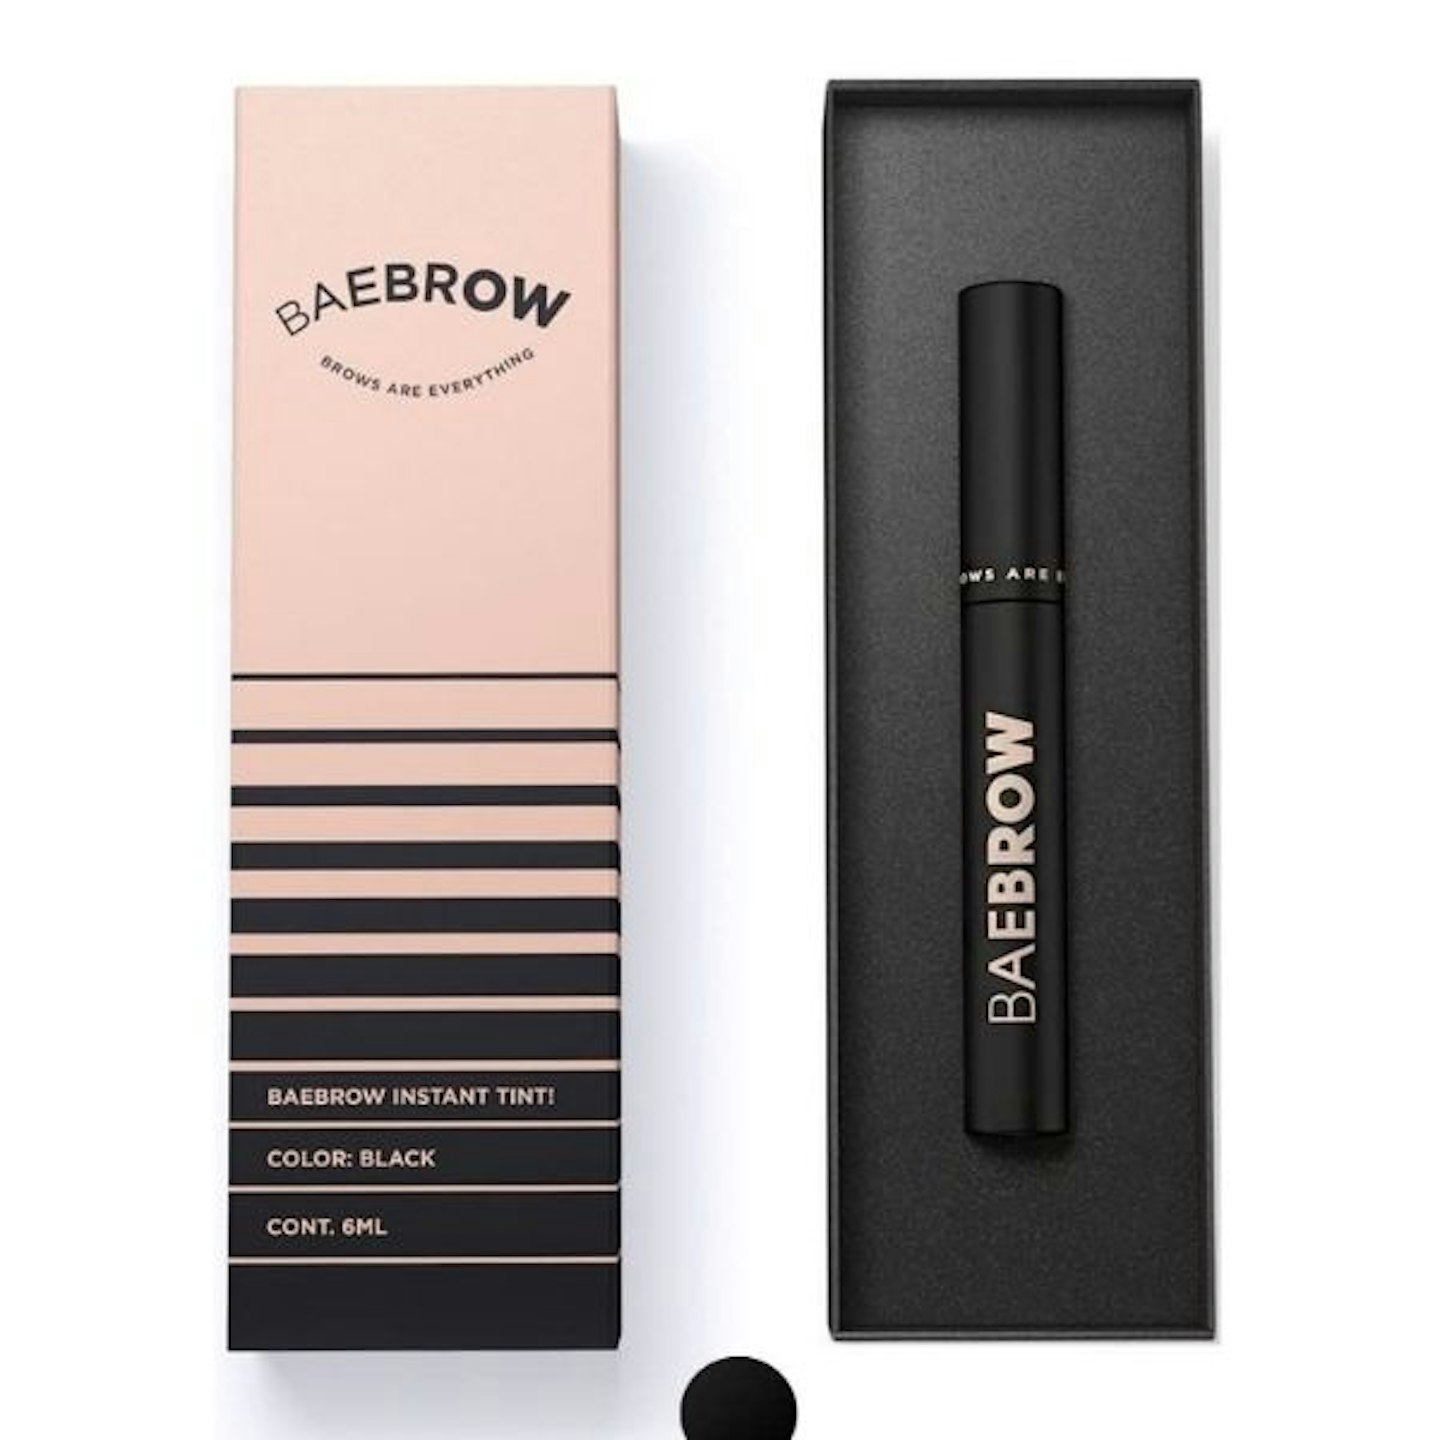 BAEBROW Instant Tint for Eyebrows